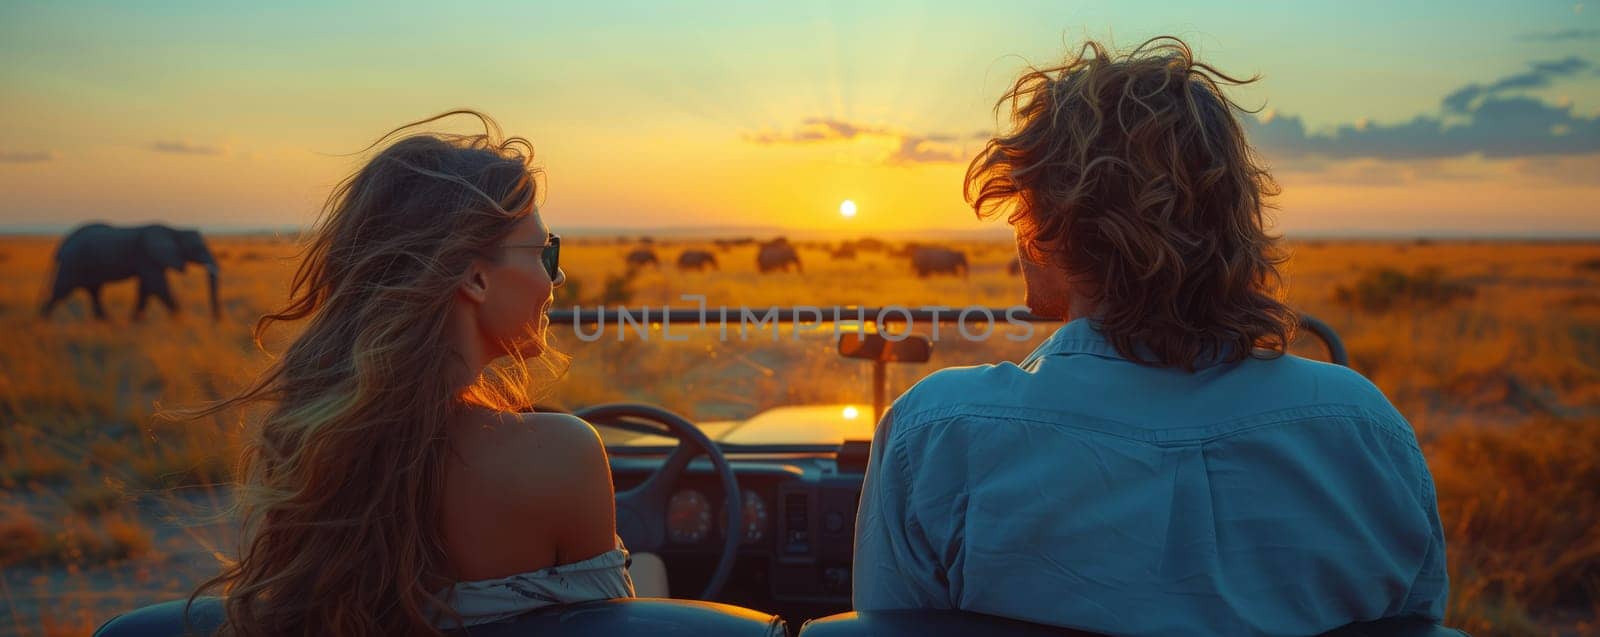 Couple in car admiring elephant against vibrant sky backdrop by richwolf